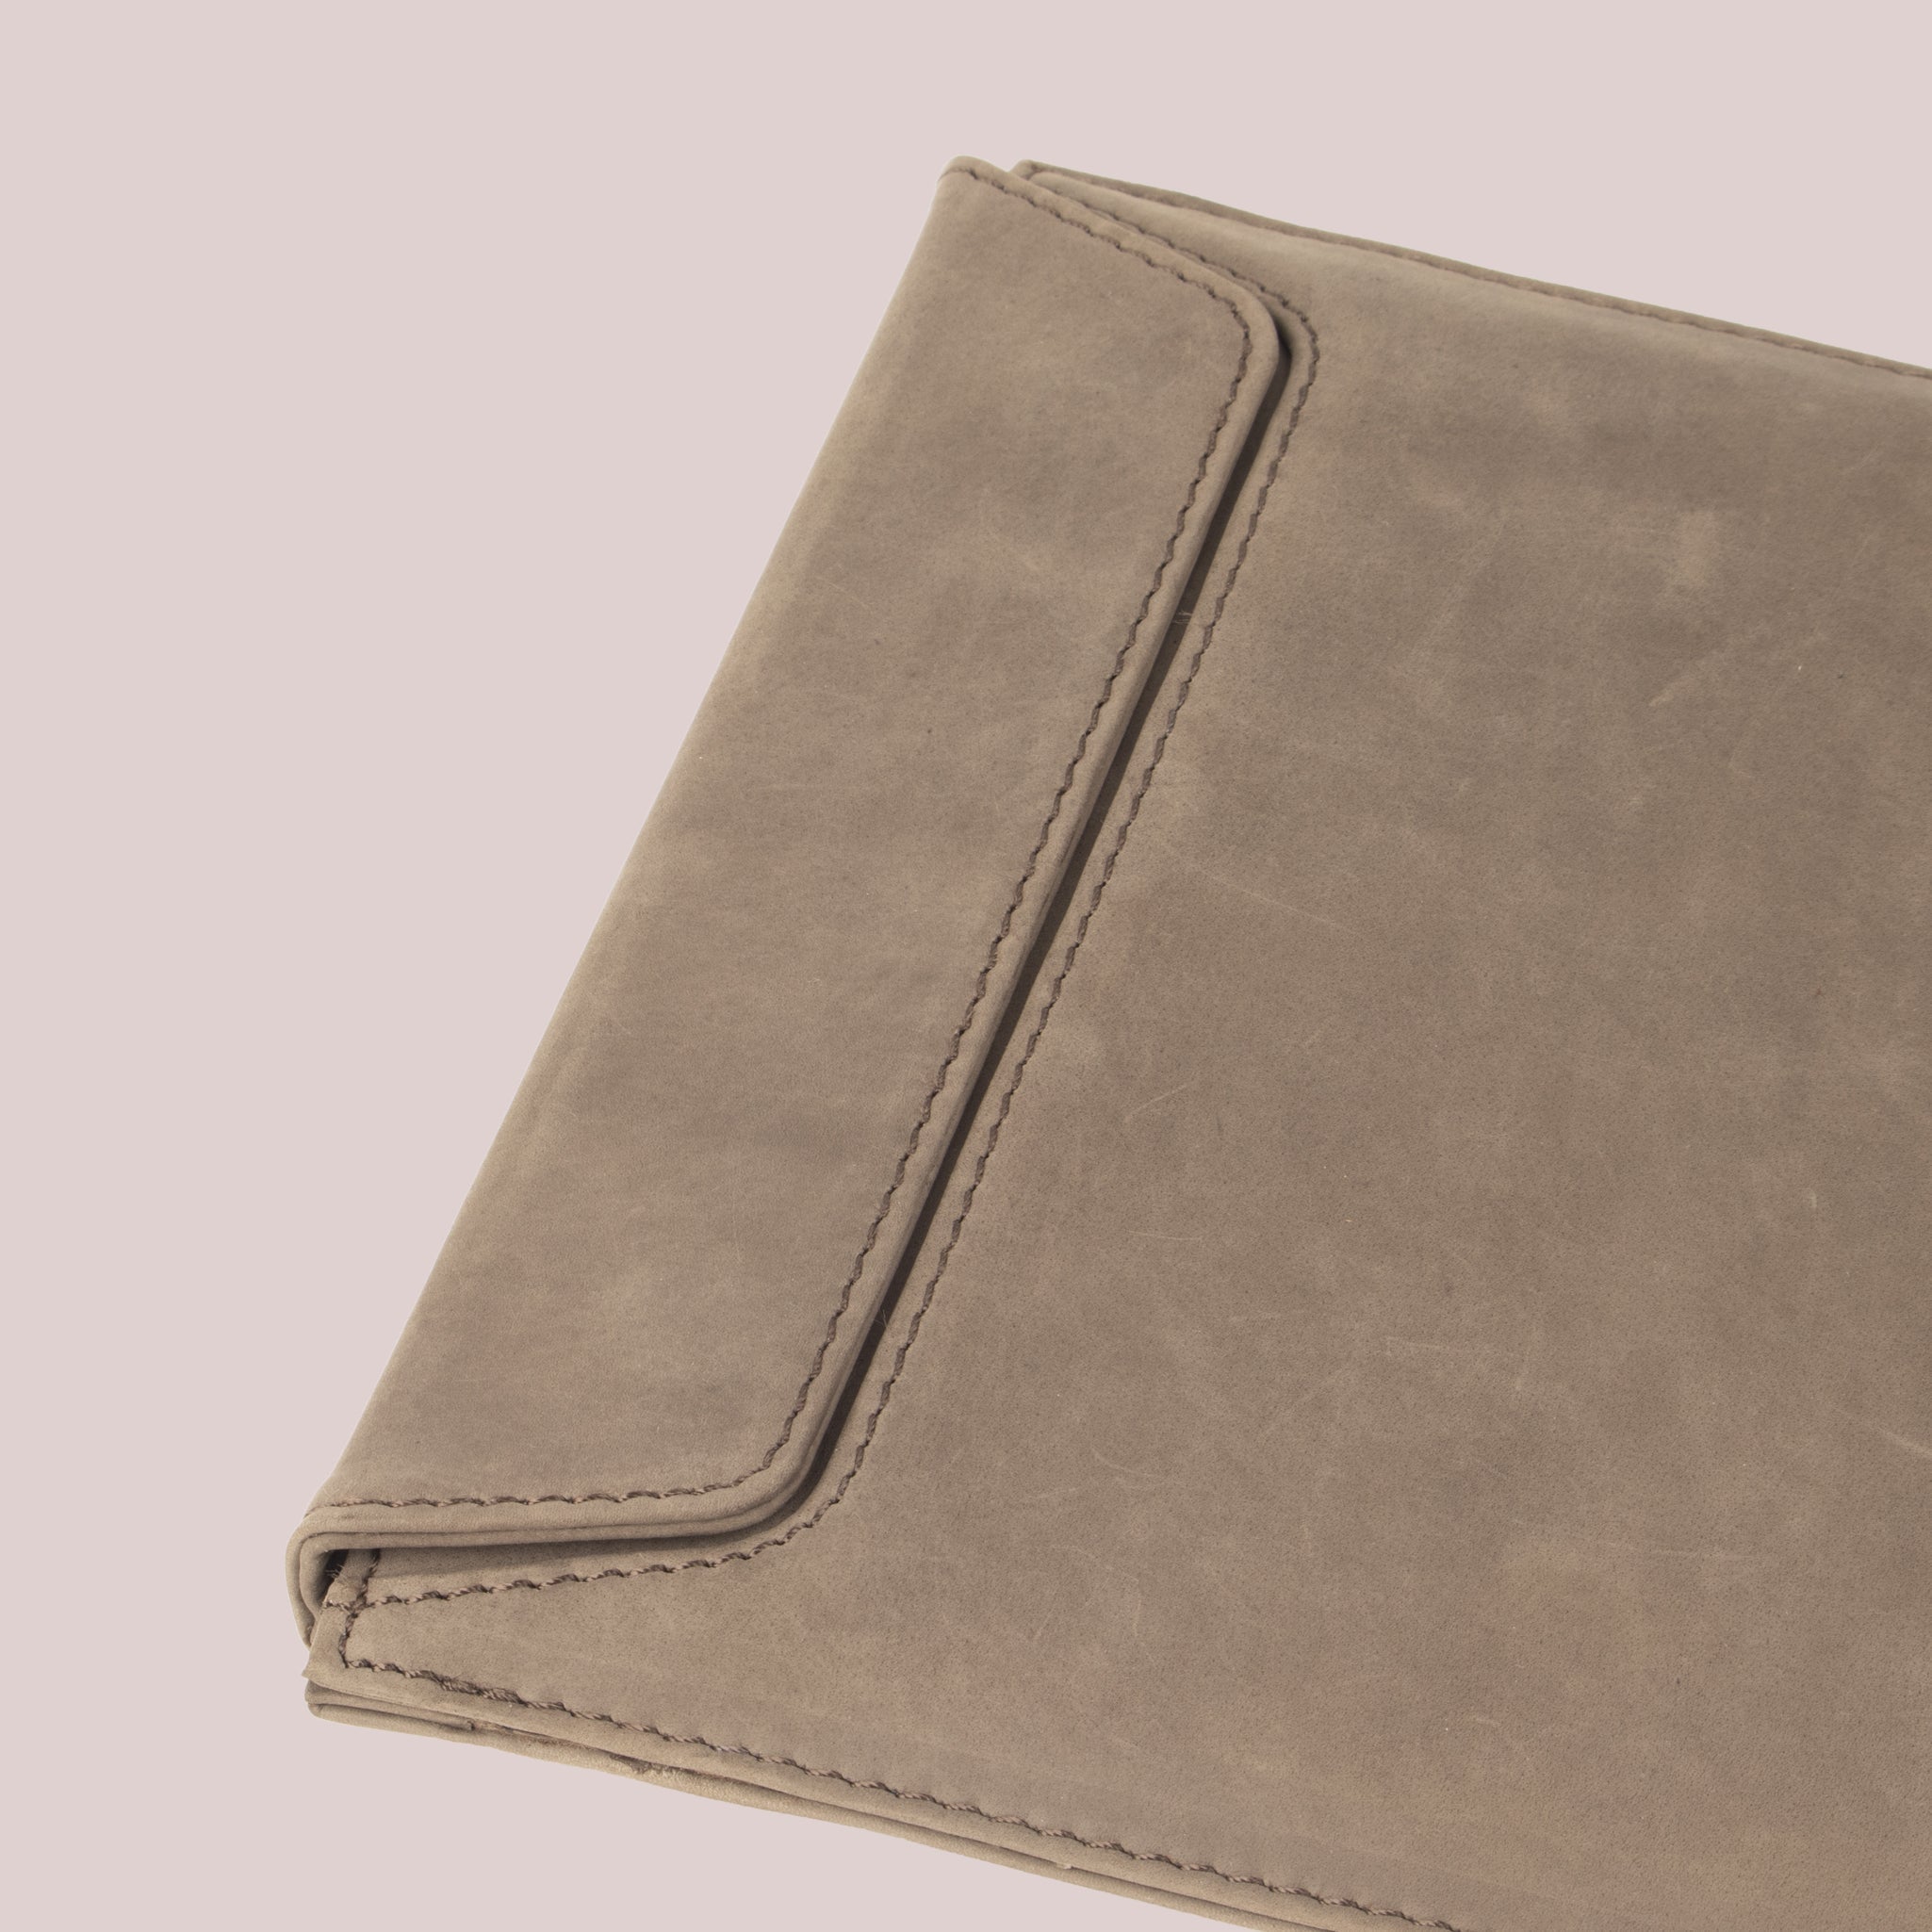 Order online Grey leather sleeve with a flap for Macbook laptops